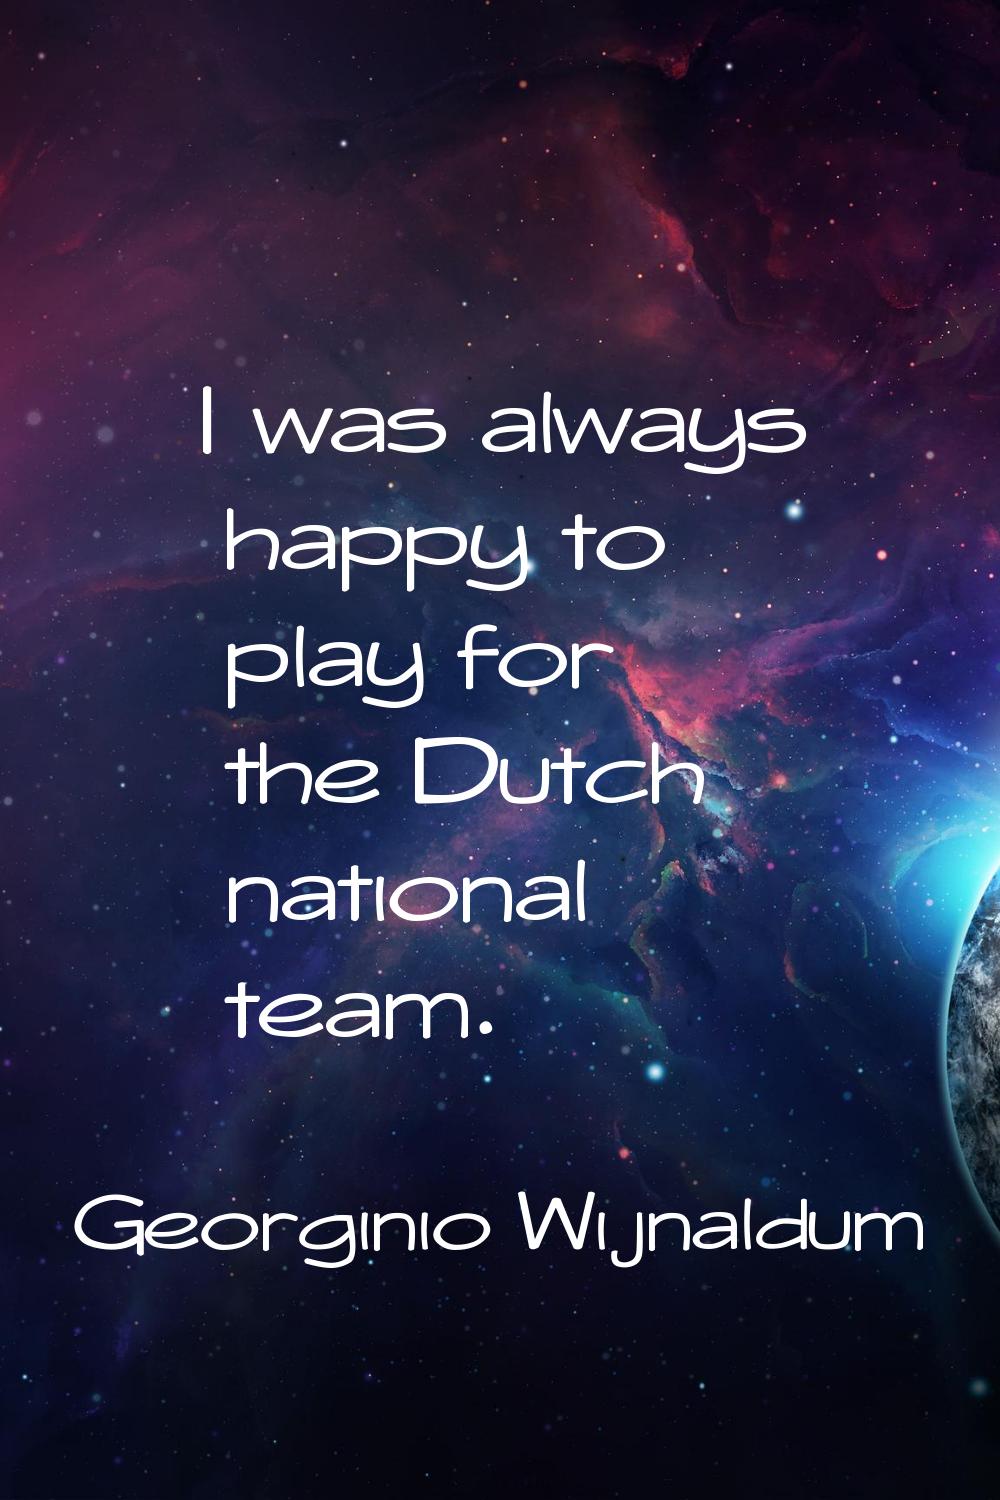 I was always happy to play for the Dutch national team.